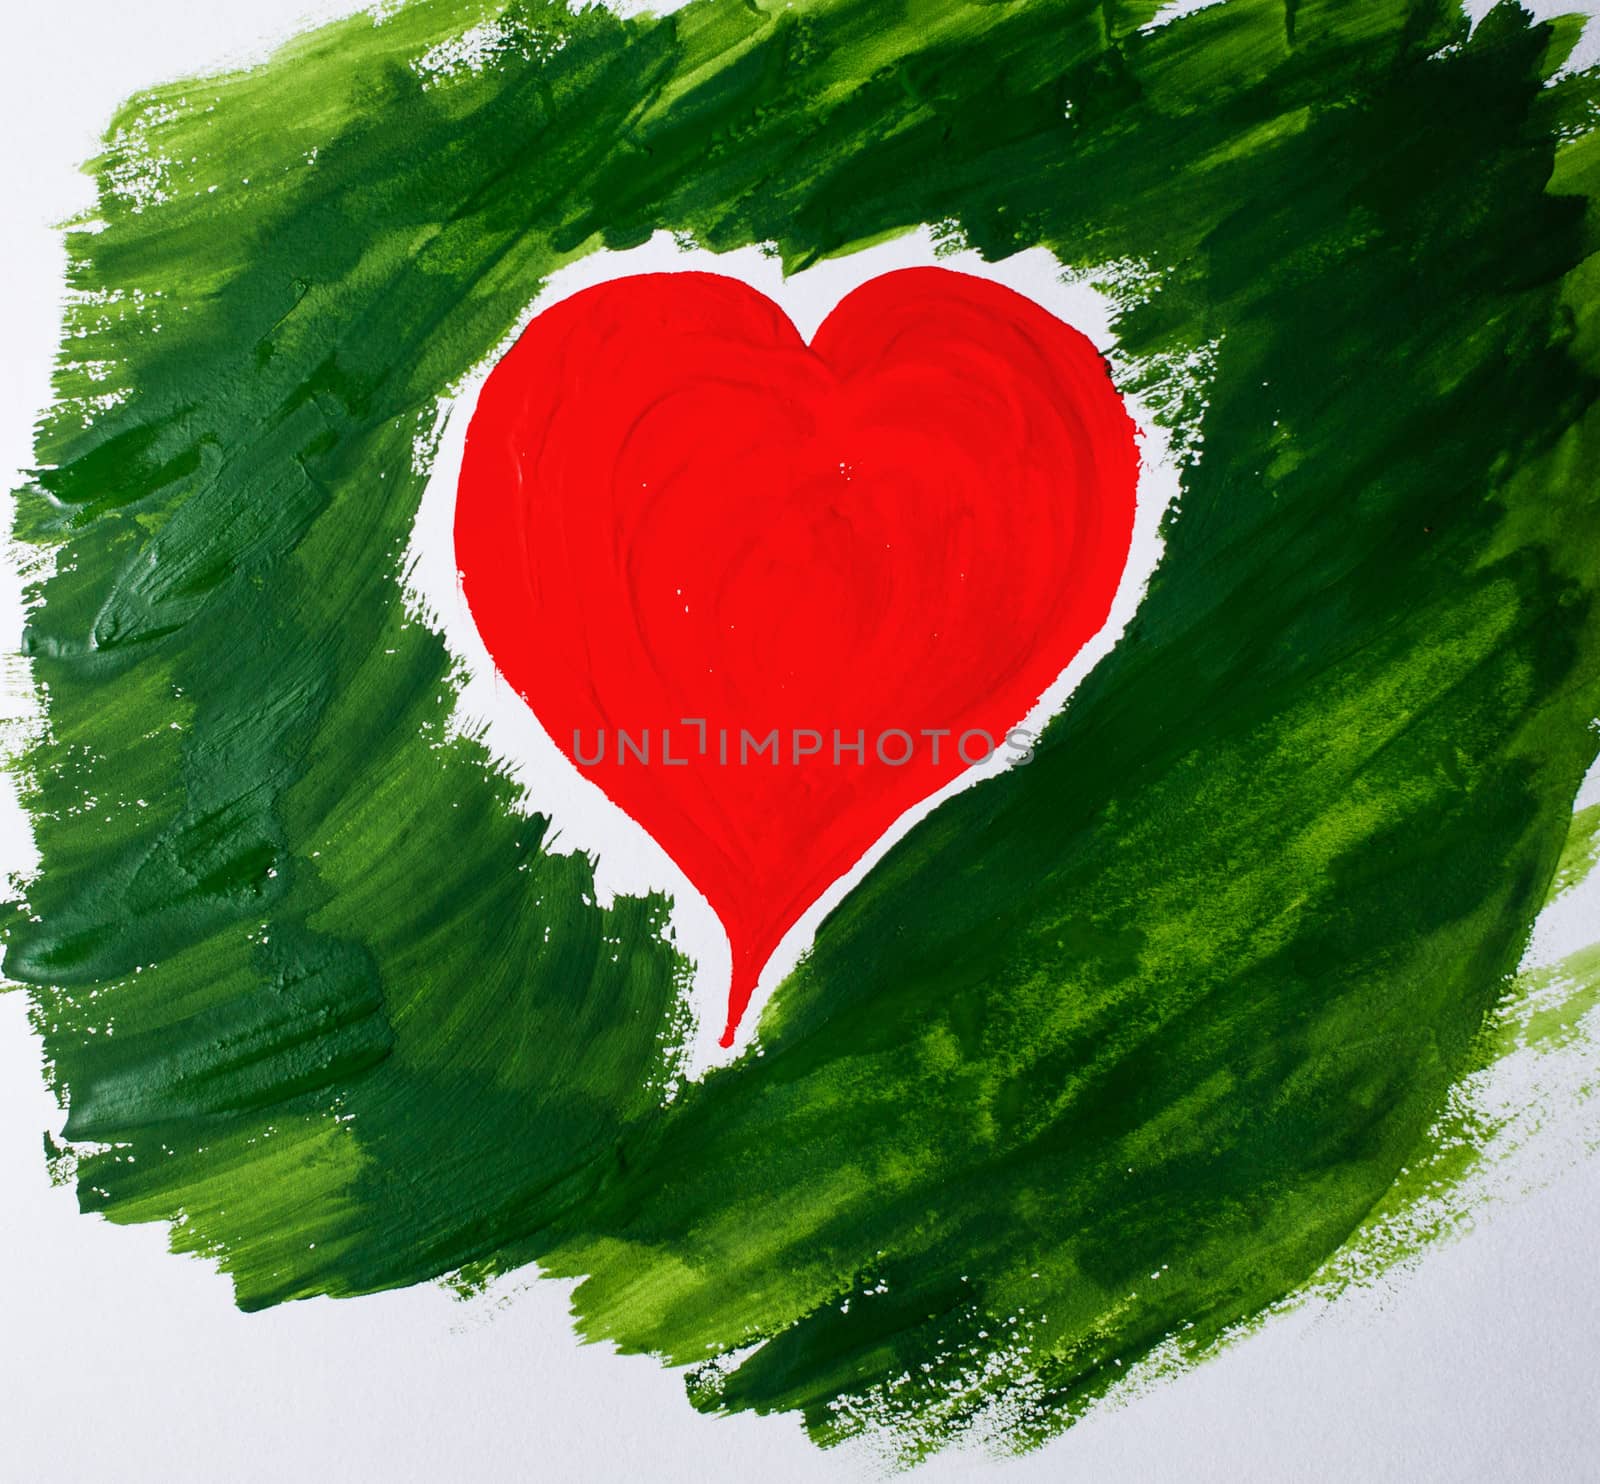 Child's drawing of a heart on a green background for Valentine's Day